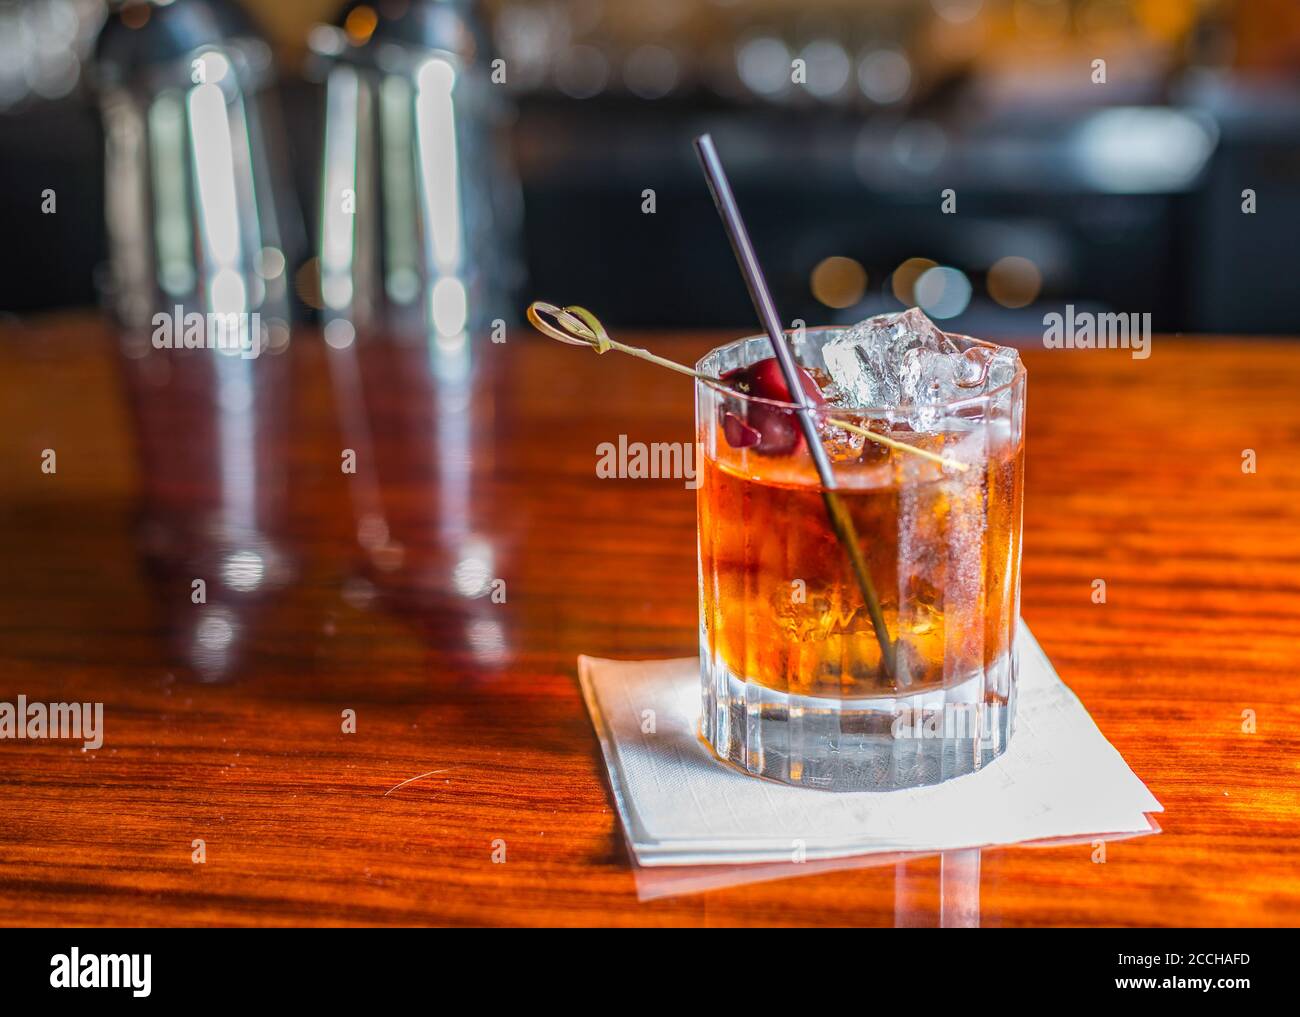 A modern rustic scene of a classic bourbon whisky craft cocktail served on the rocks in a rocks glass with cherry garnish on a wooden bar Stock Photo